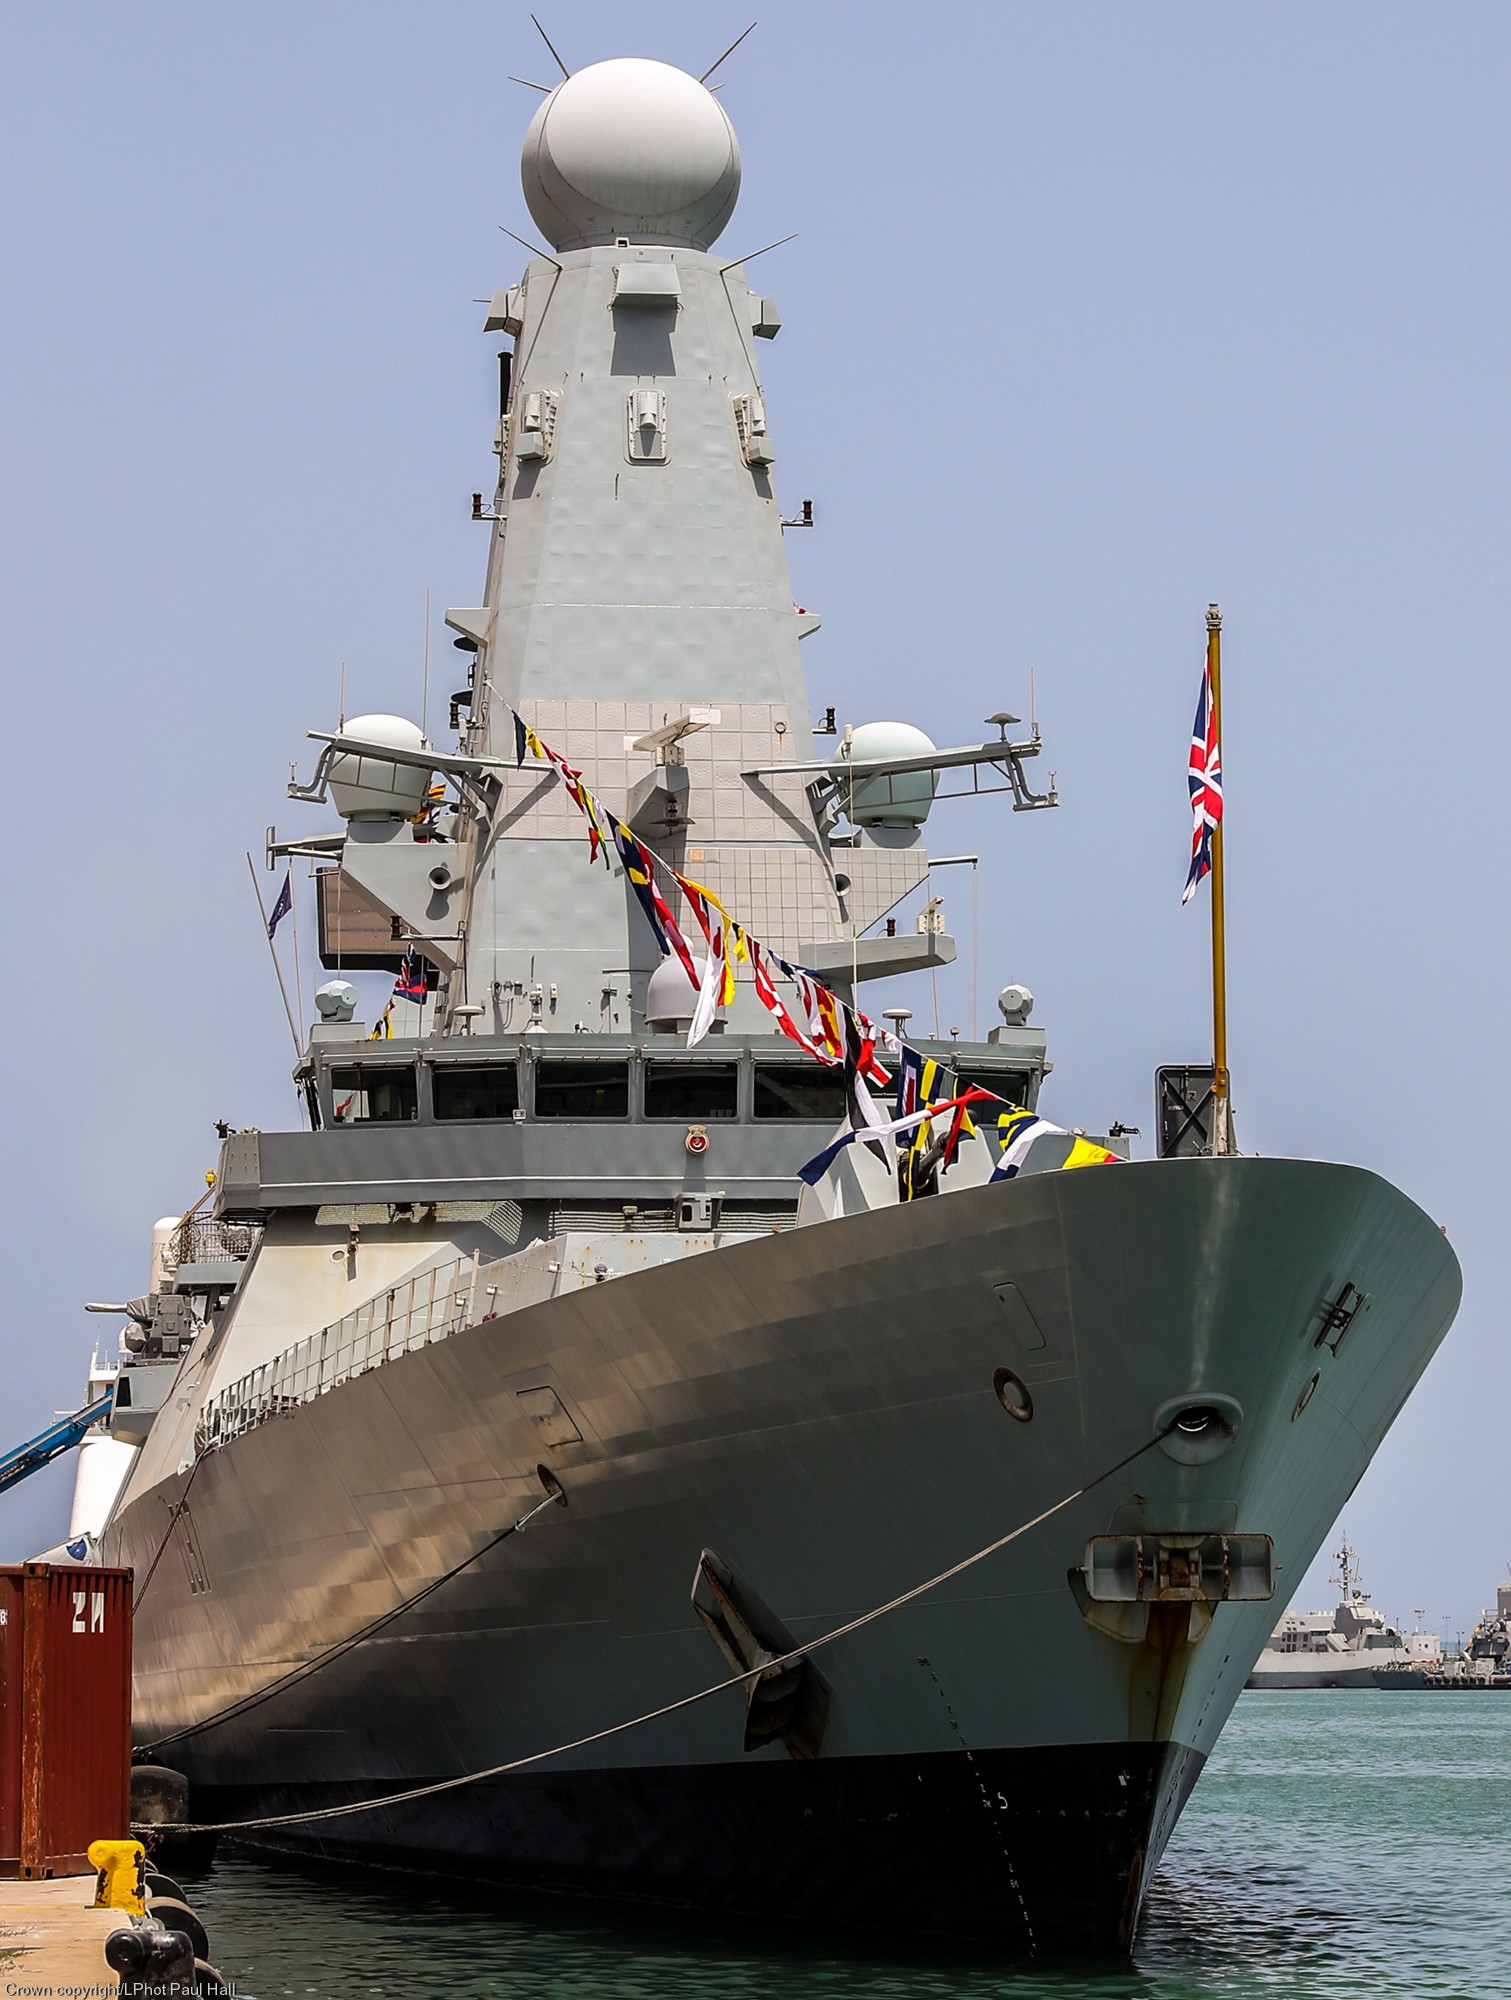 d37 hms duncan d-37 type 45 daring class guided missile destroyer ddg royal navy sea viper 54